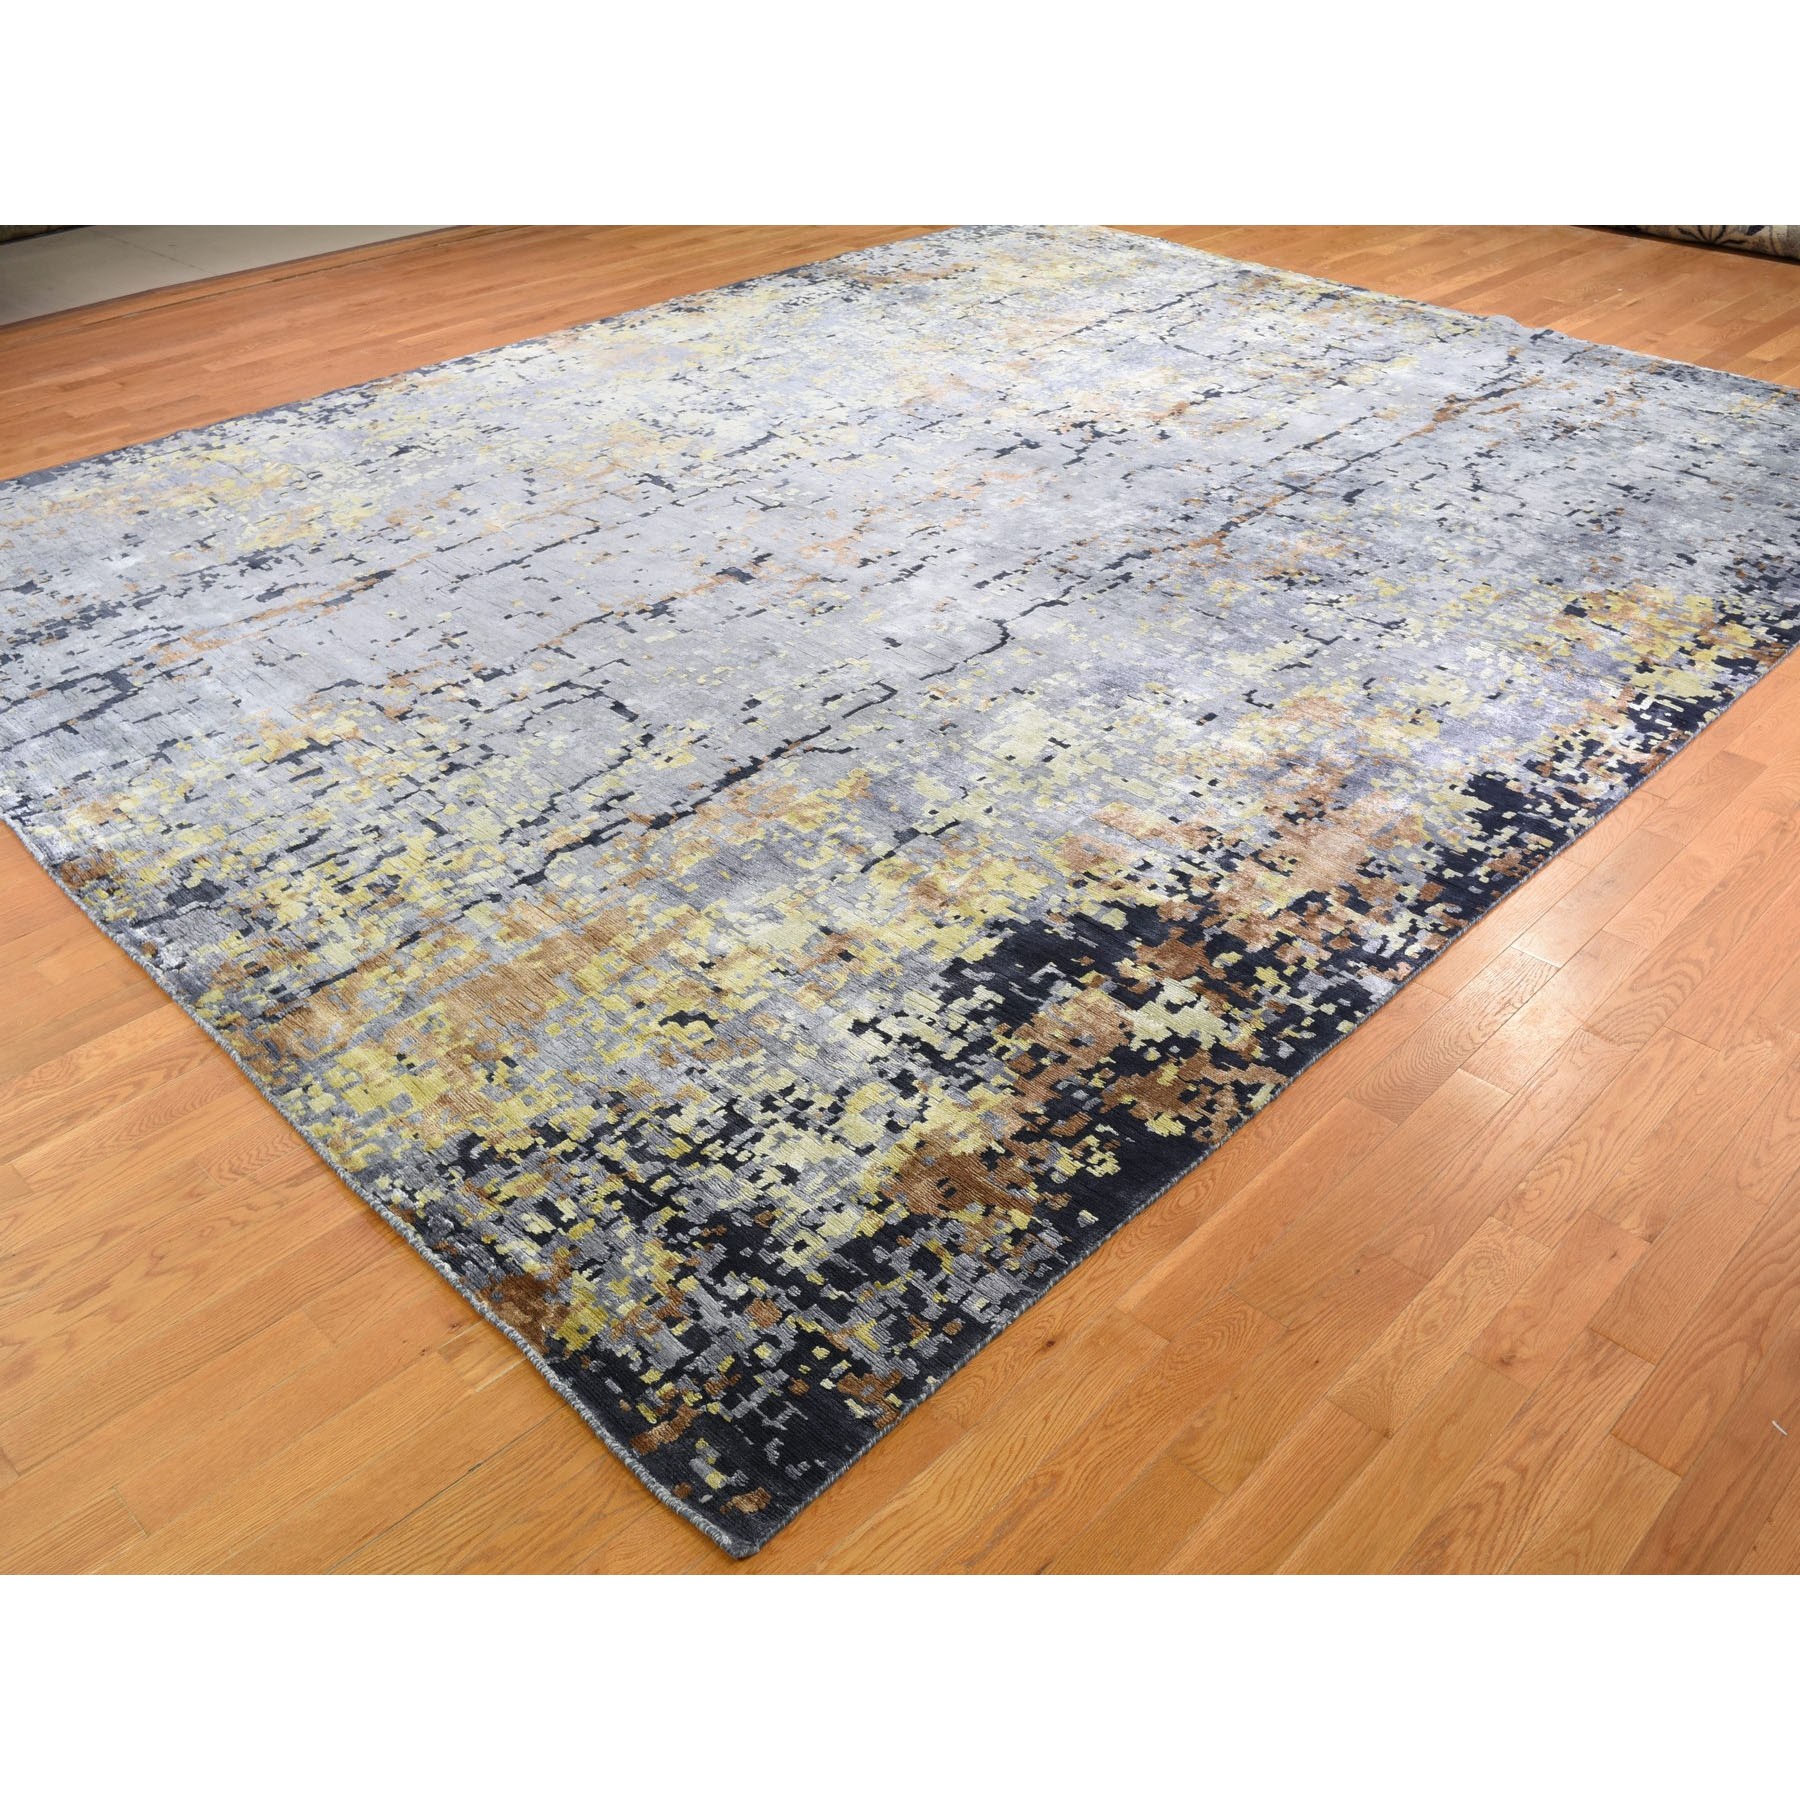 11-10 x14-9  Oversize Gray Abstract Design Wool and Silk Hi-Low Pile Hand Knotted Oriental Rug 